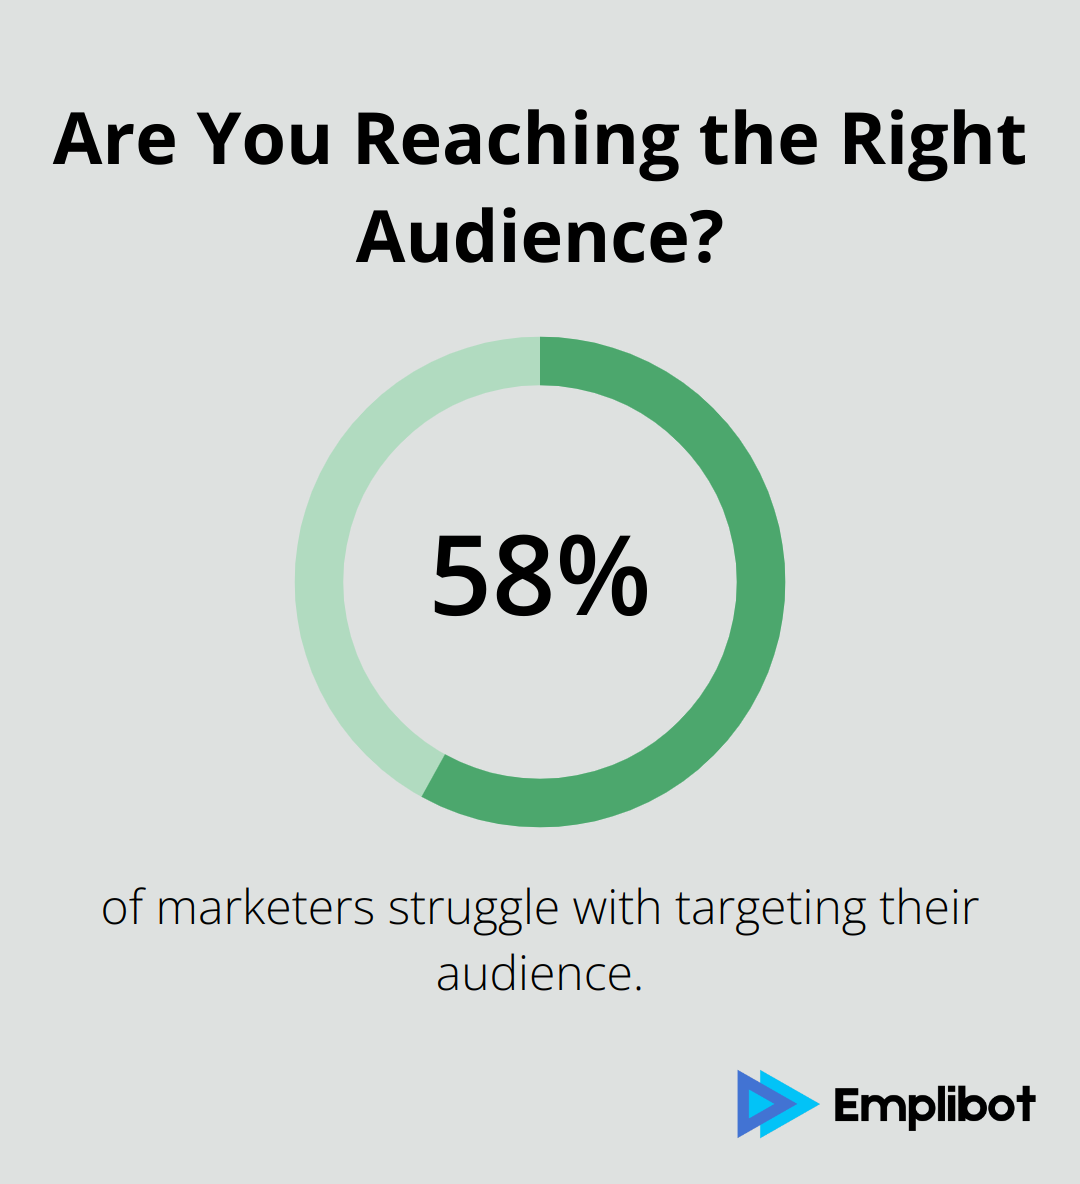 Are You Reaching the Right Audience?